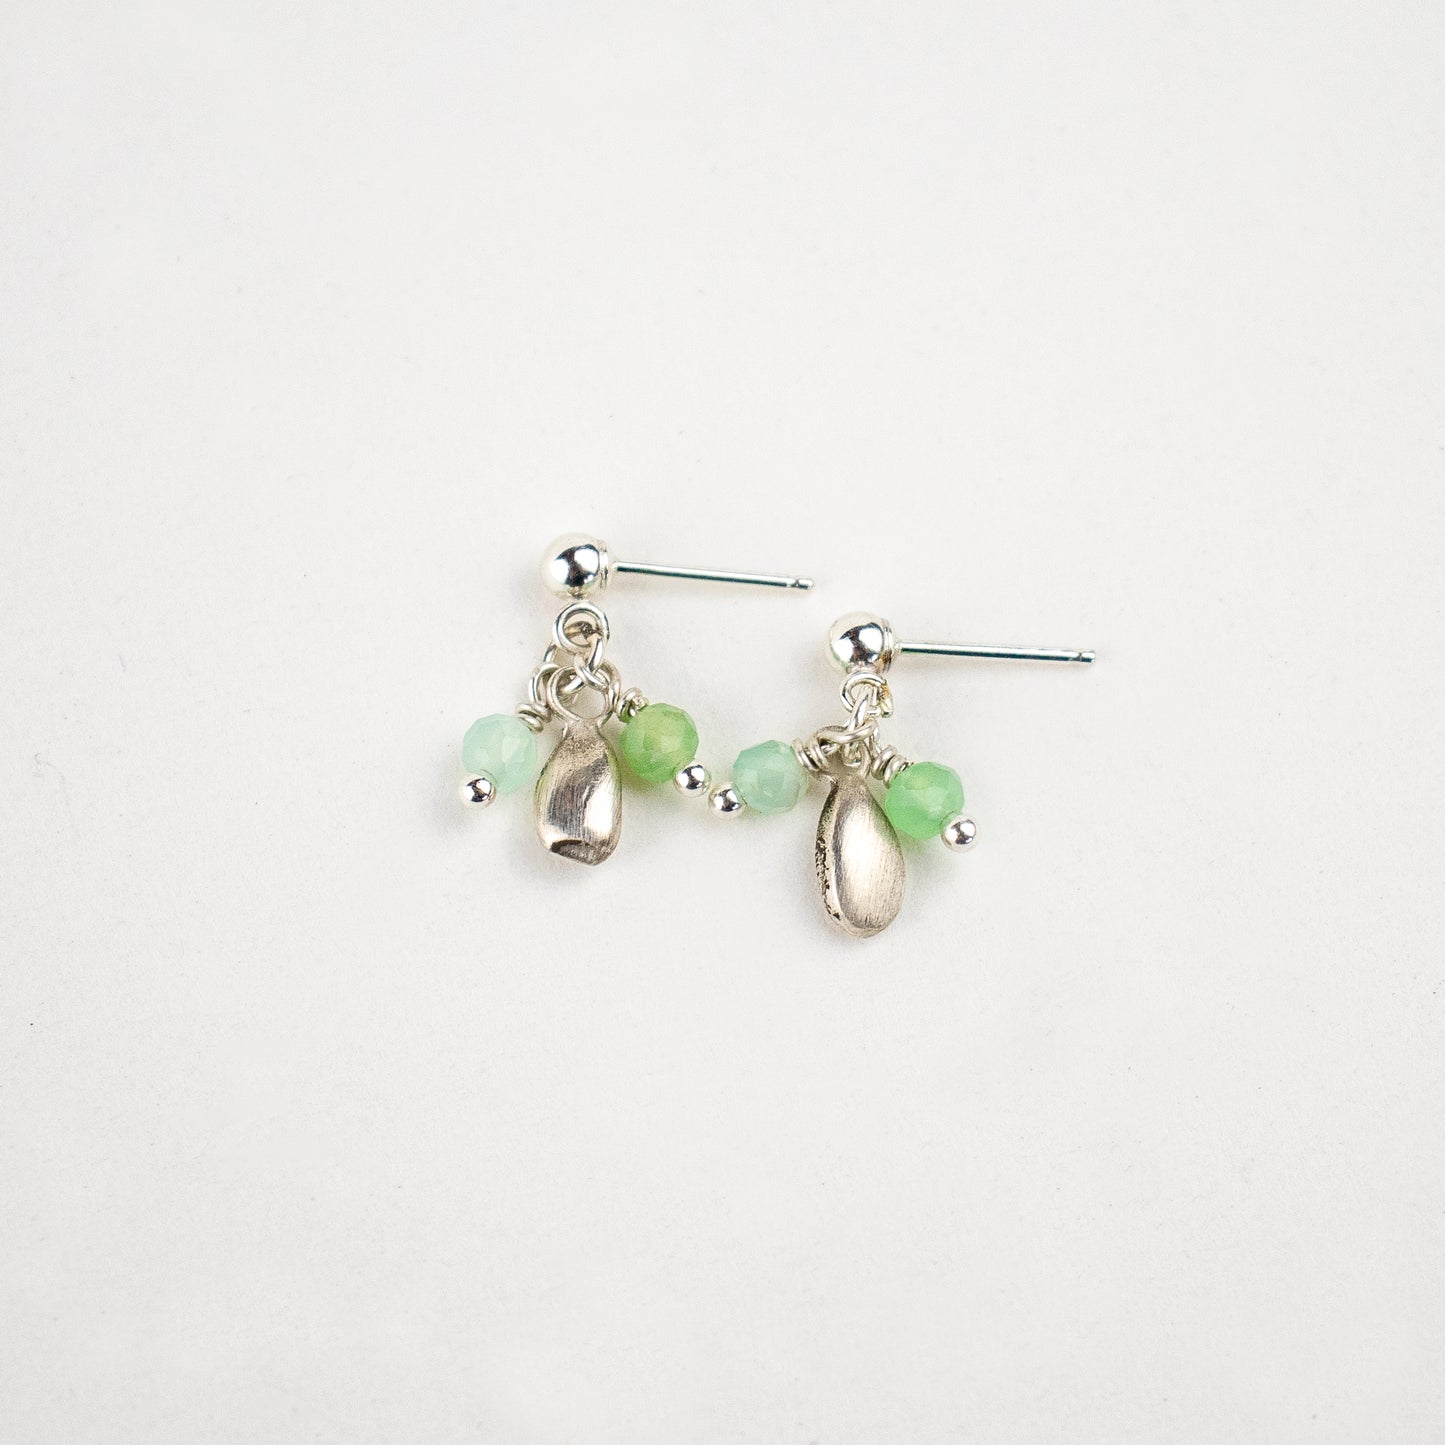 Reclaimed solid sterling silver seed stud earrings hand-beaded with your choice of two 2mm chrysoprase, opal, watermelon tourmaline, aquamarine, moonstone, onyx, or a mix of citrine and labradorite beads.